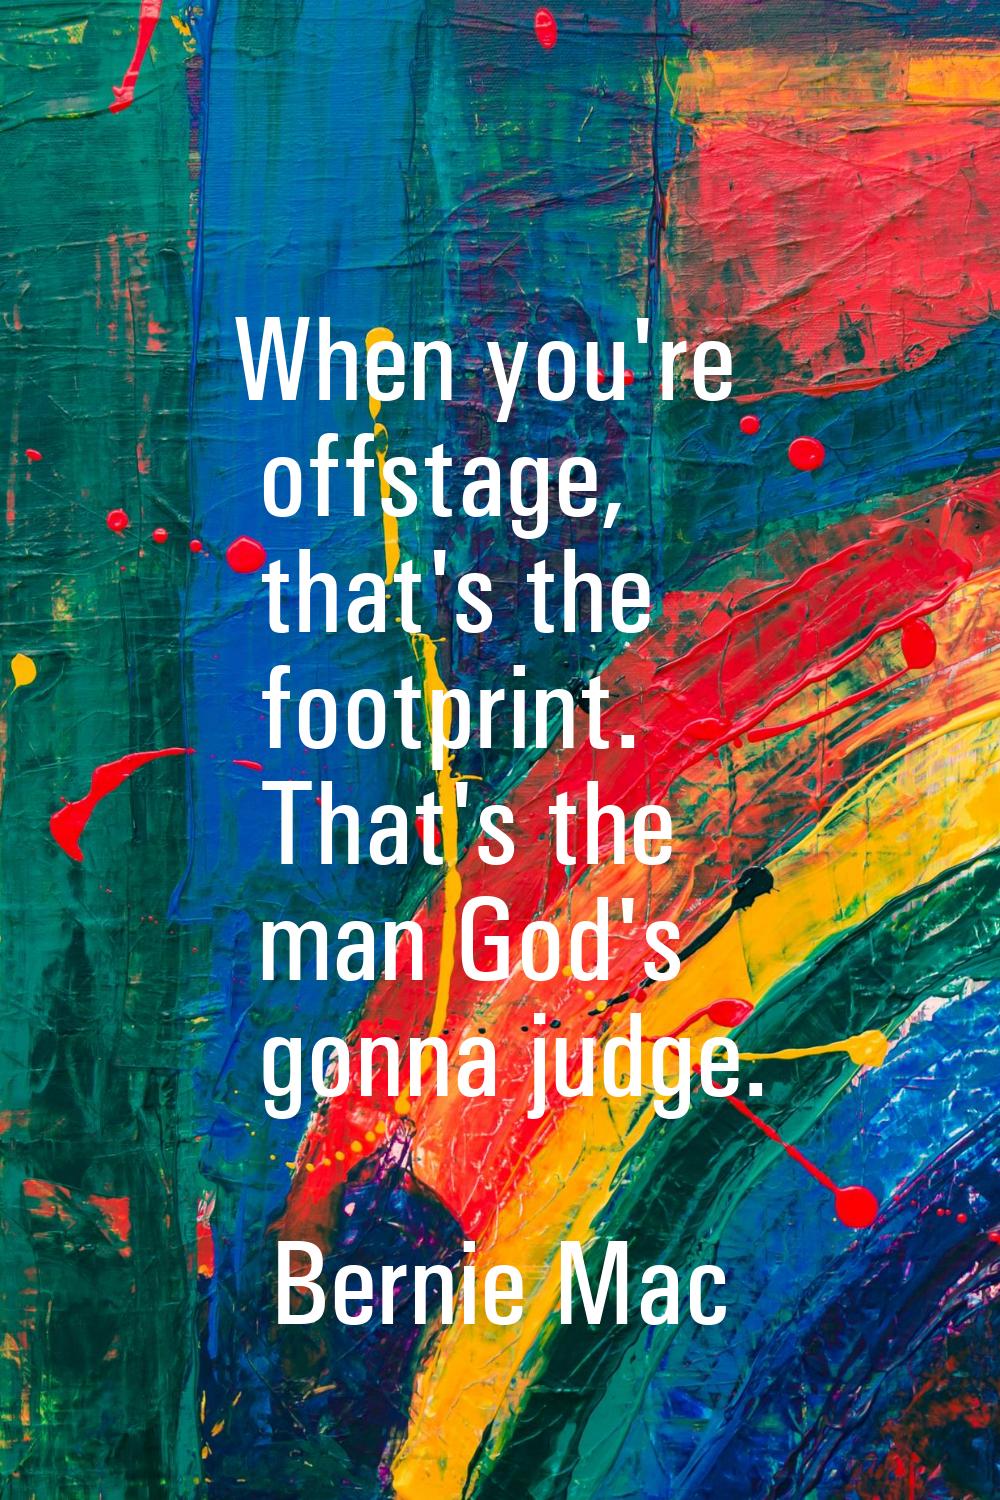 When you're offstage, that's the footprint. That's the man God's gonna judge.